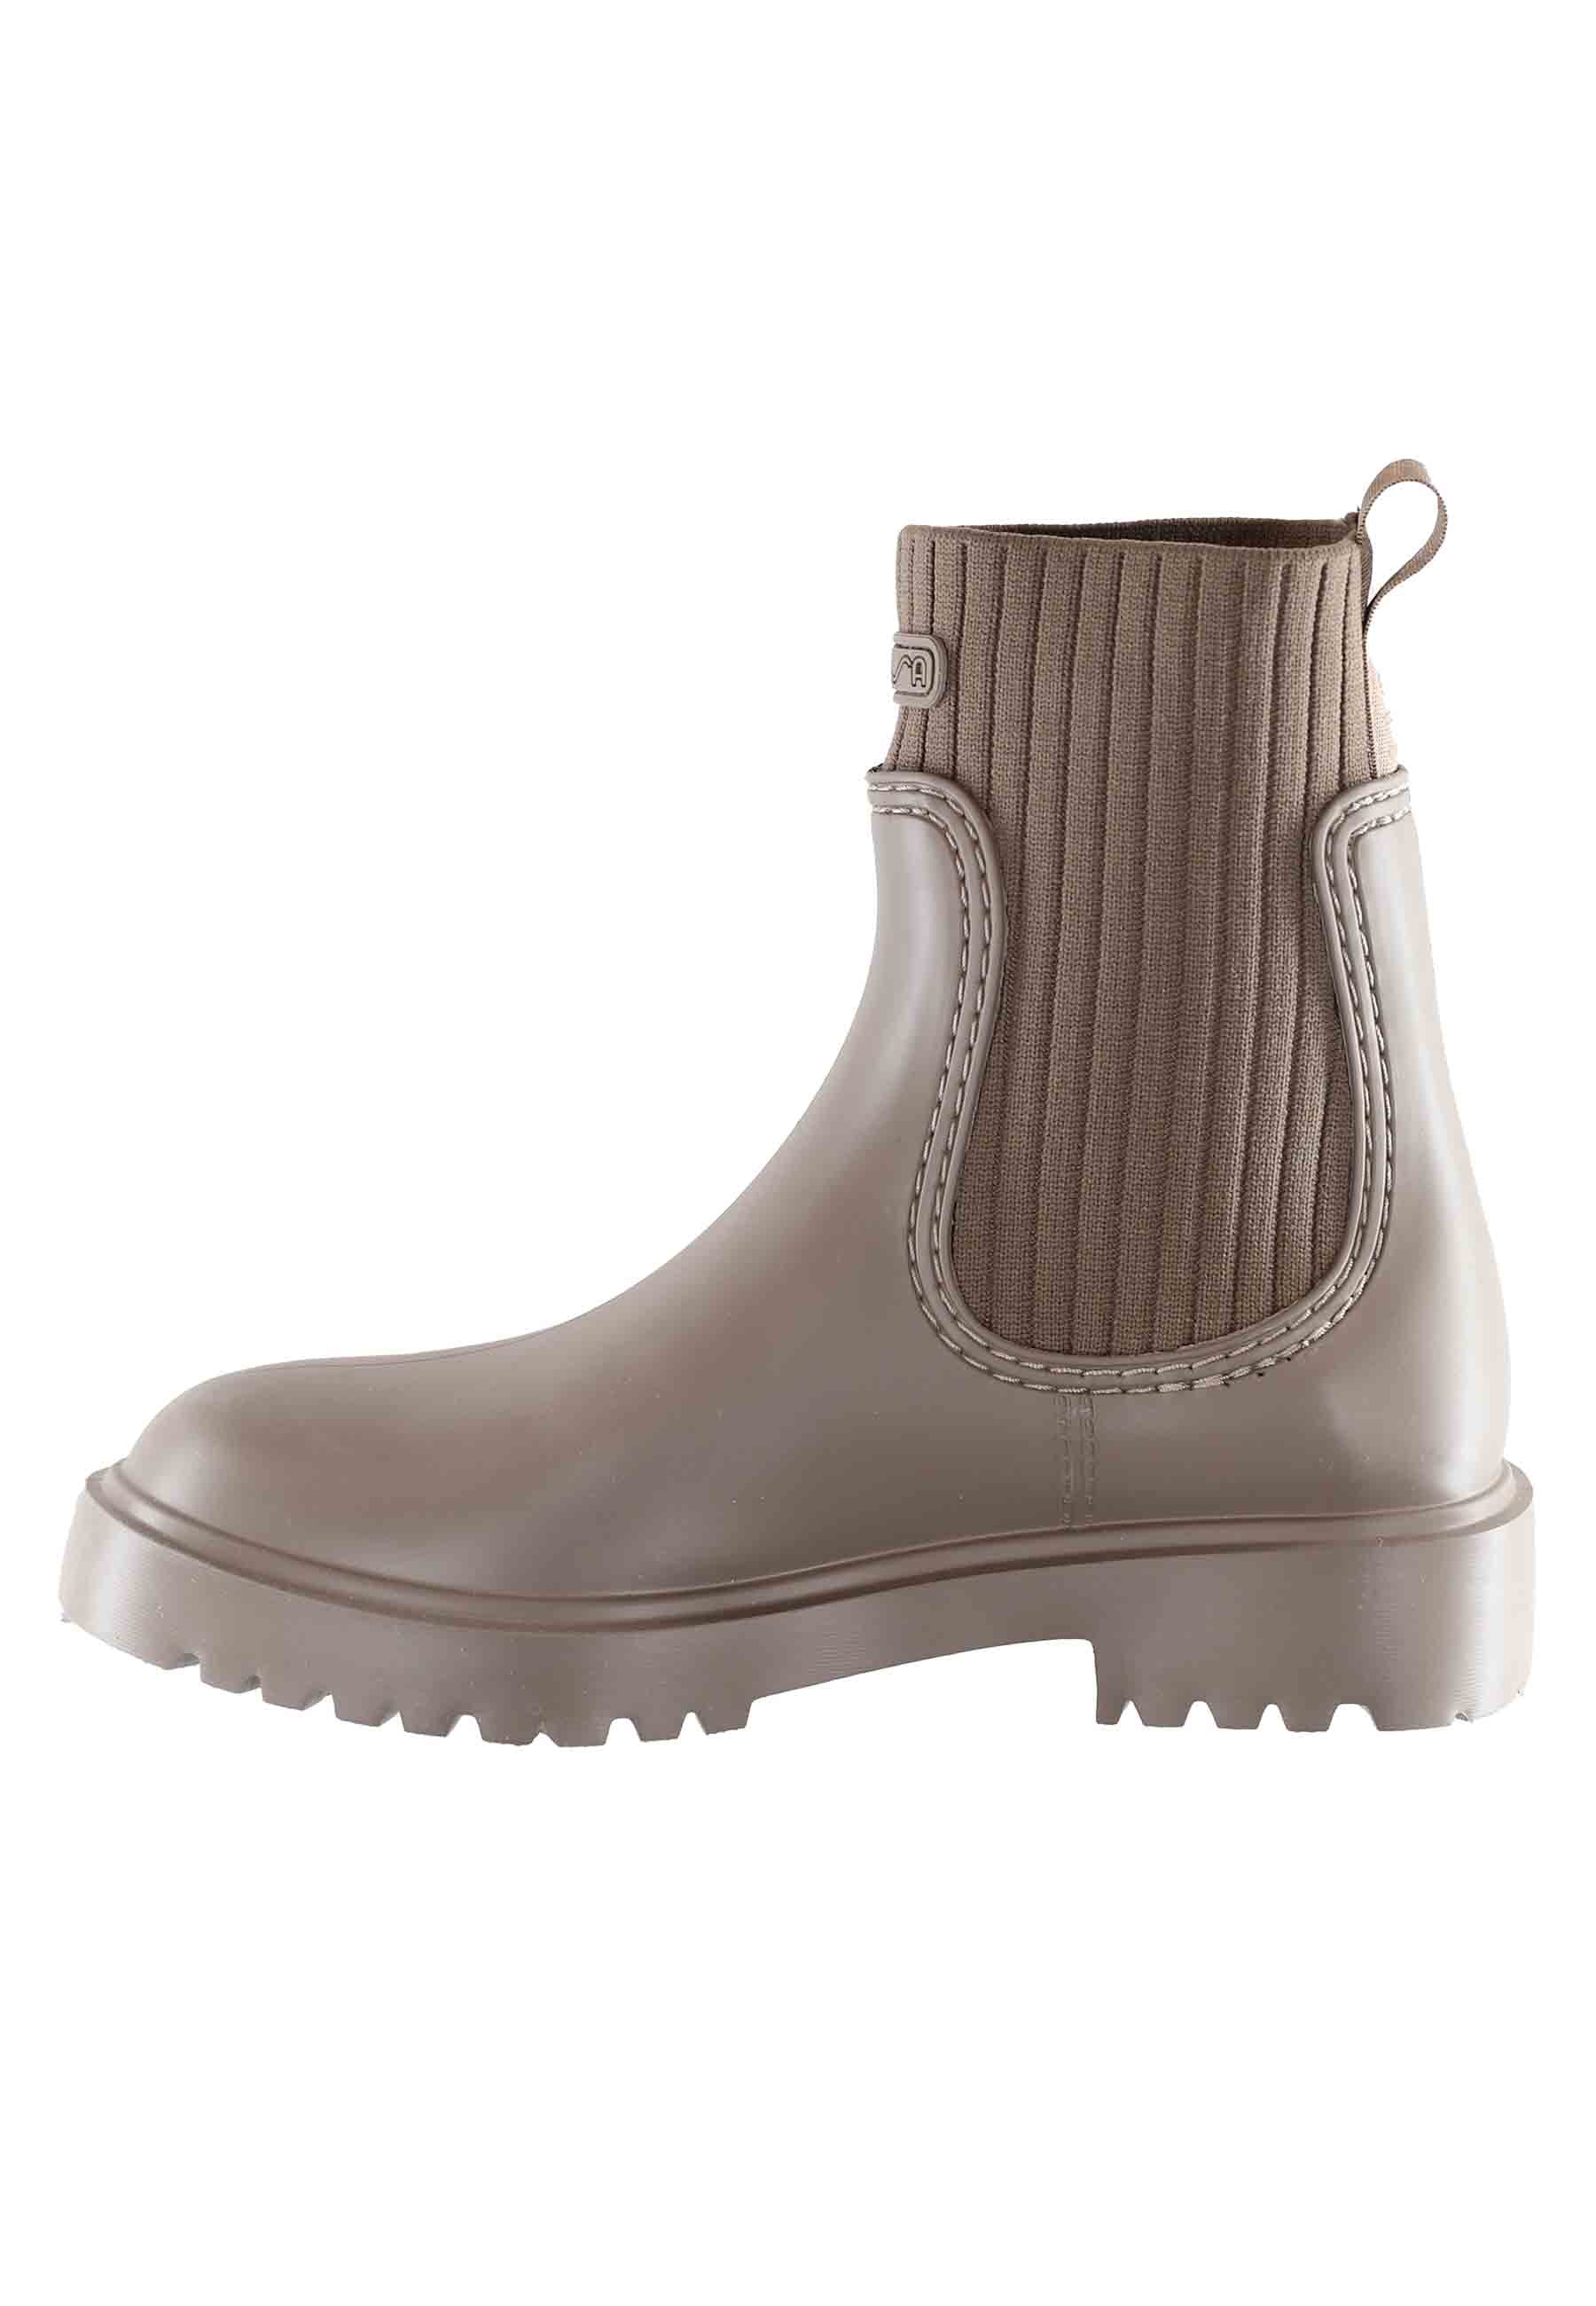 Women's rain boots in taupe PVC with side elastics